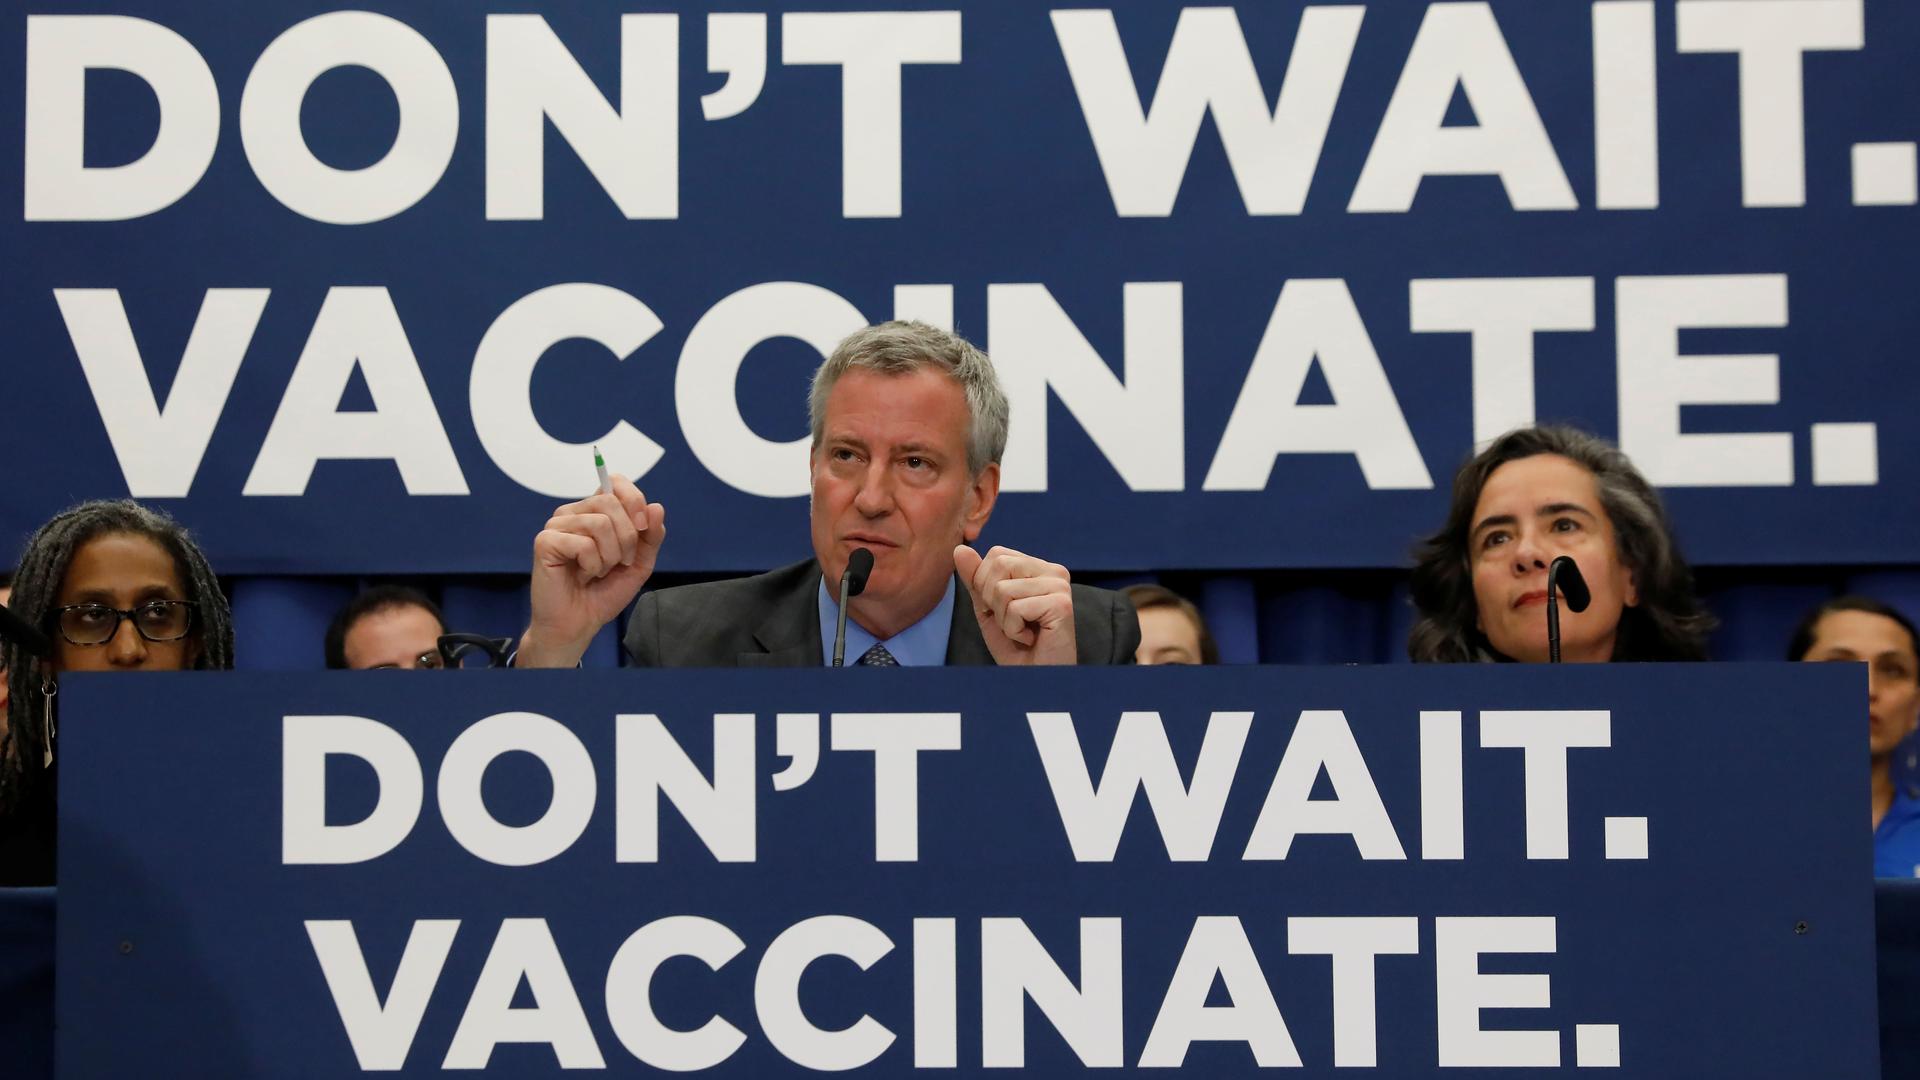 don't wait, vaccinate signs